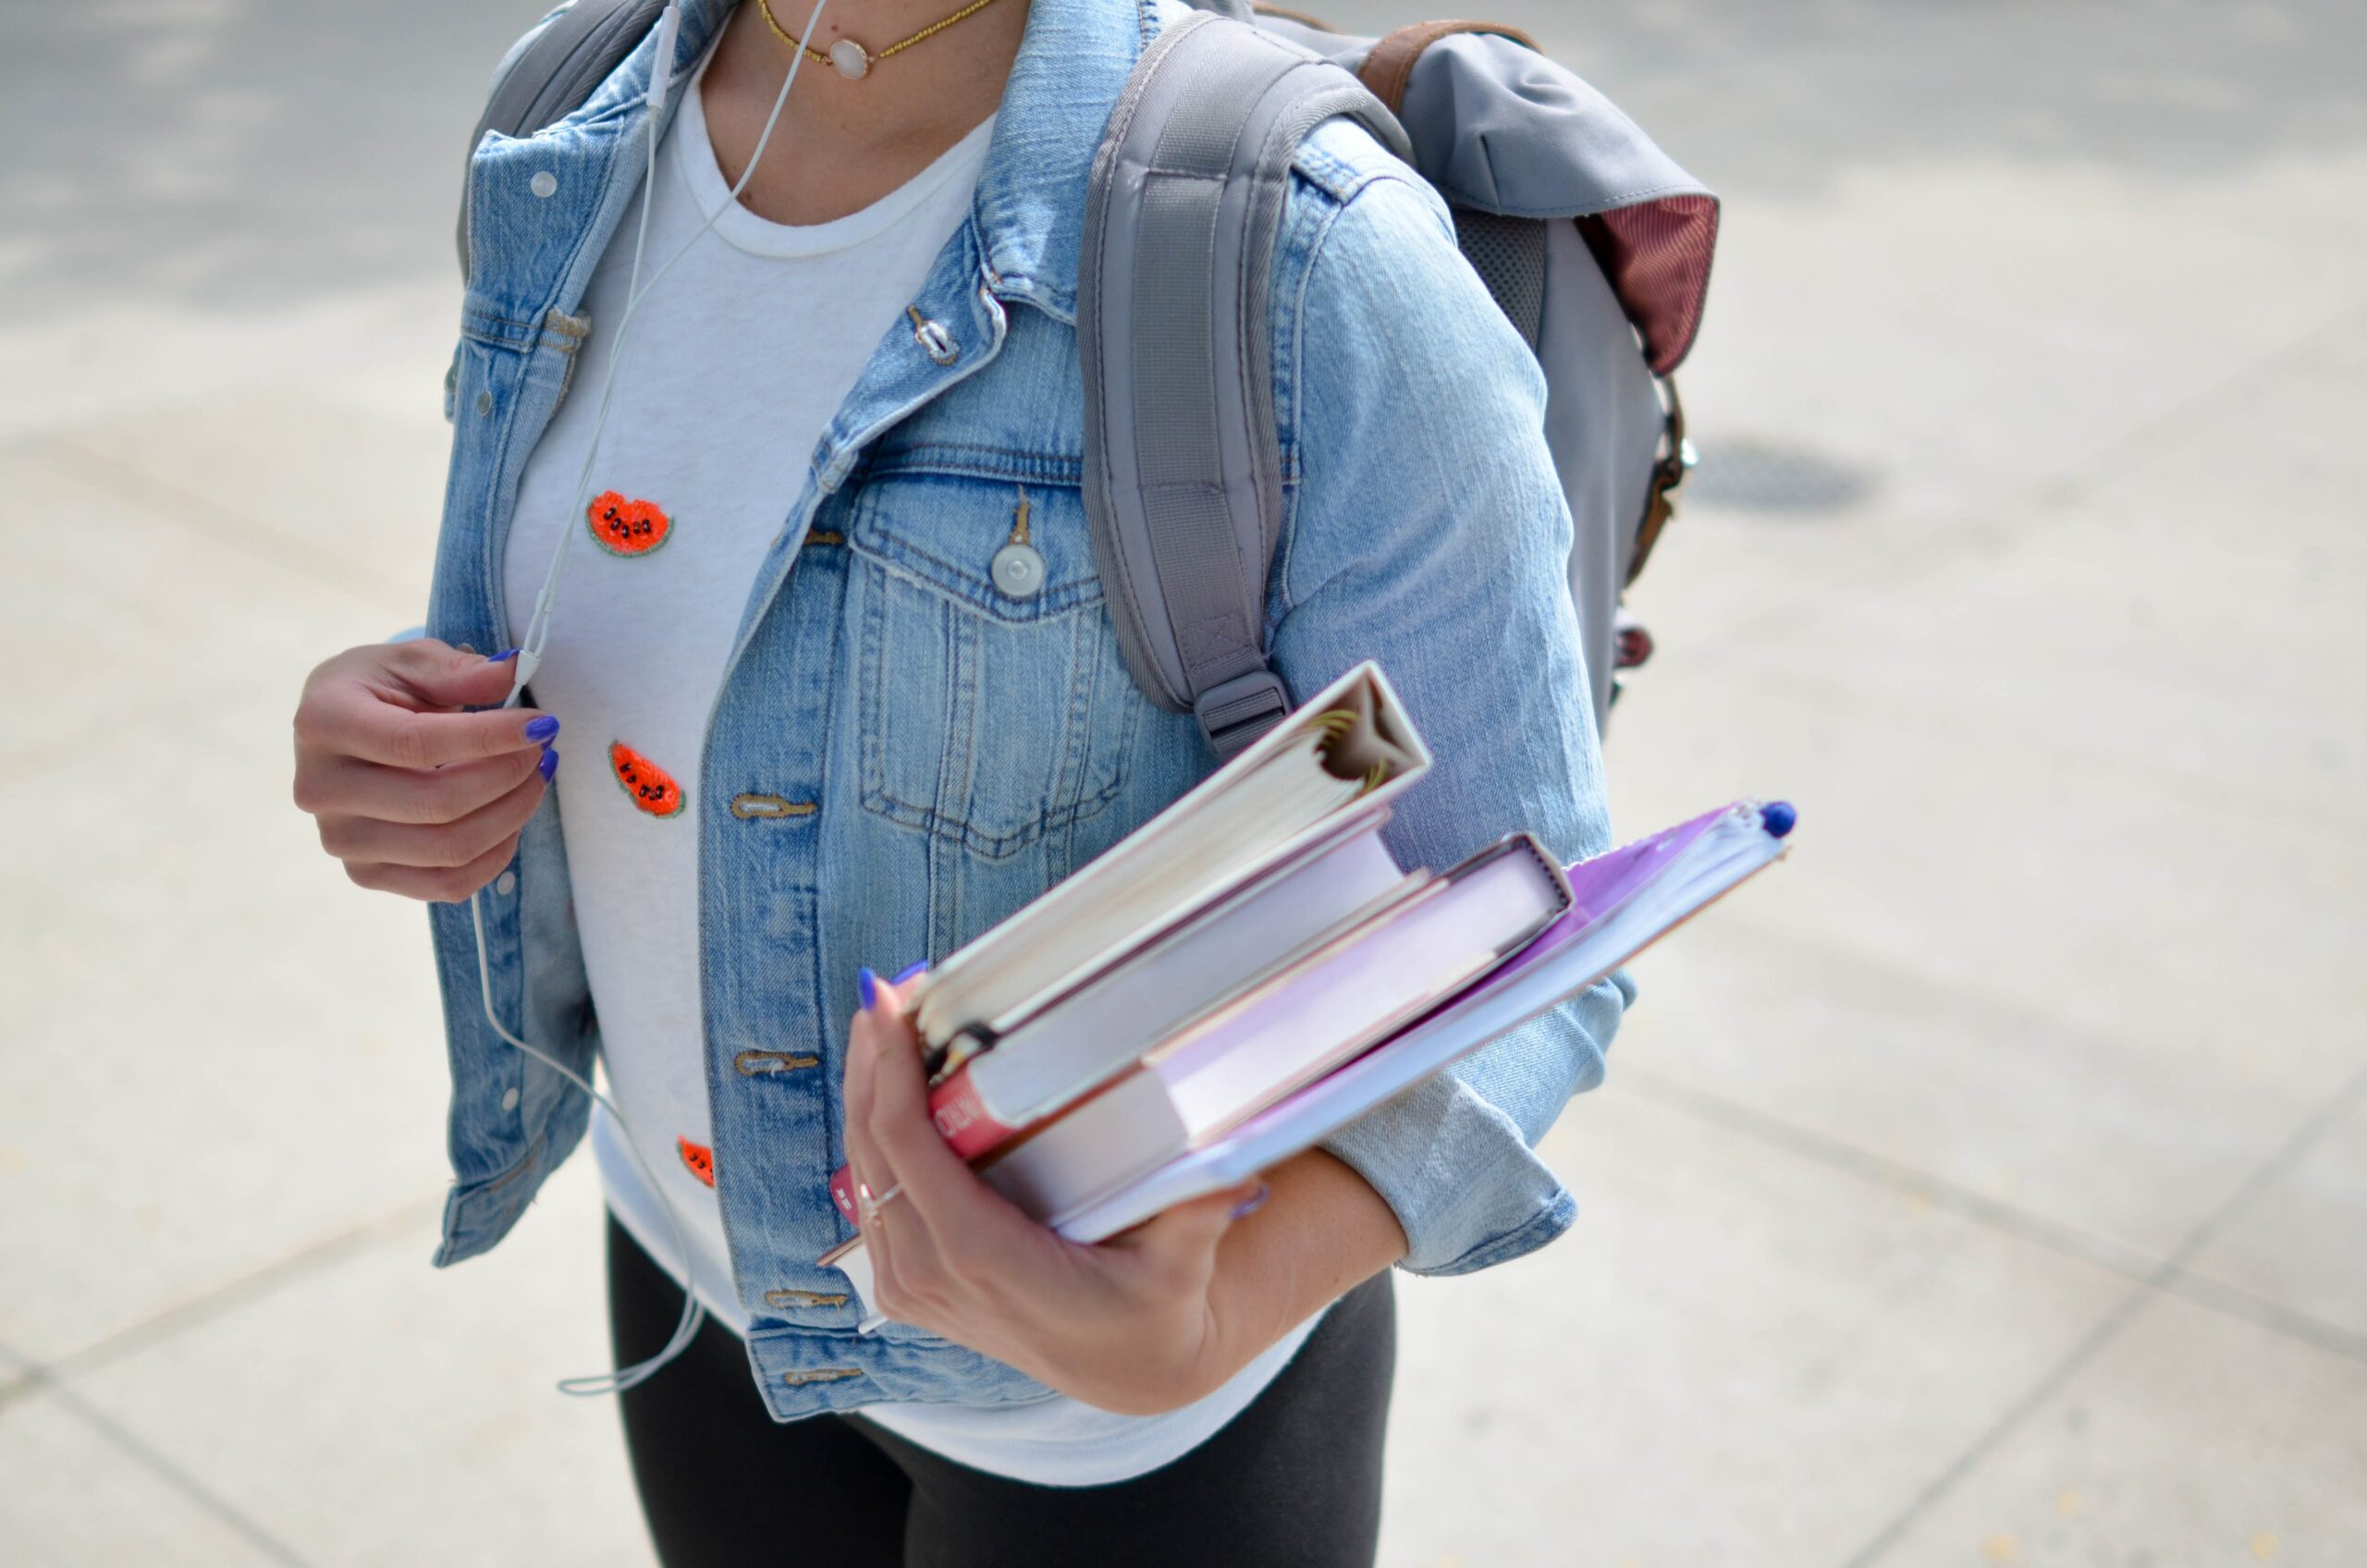 A young female high school student wearing a light blue jean jacket is walking to class wearing her backpack and carrying two notebooks and two books.